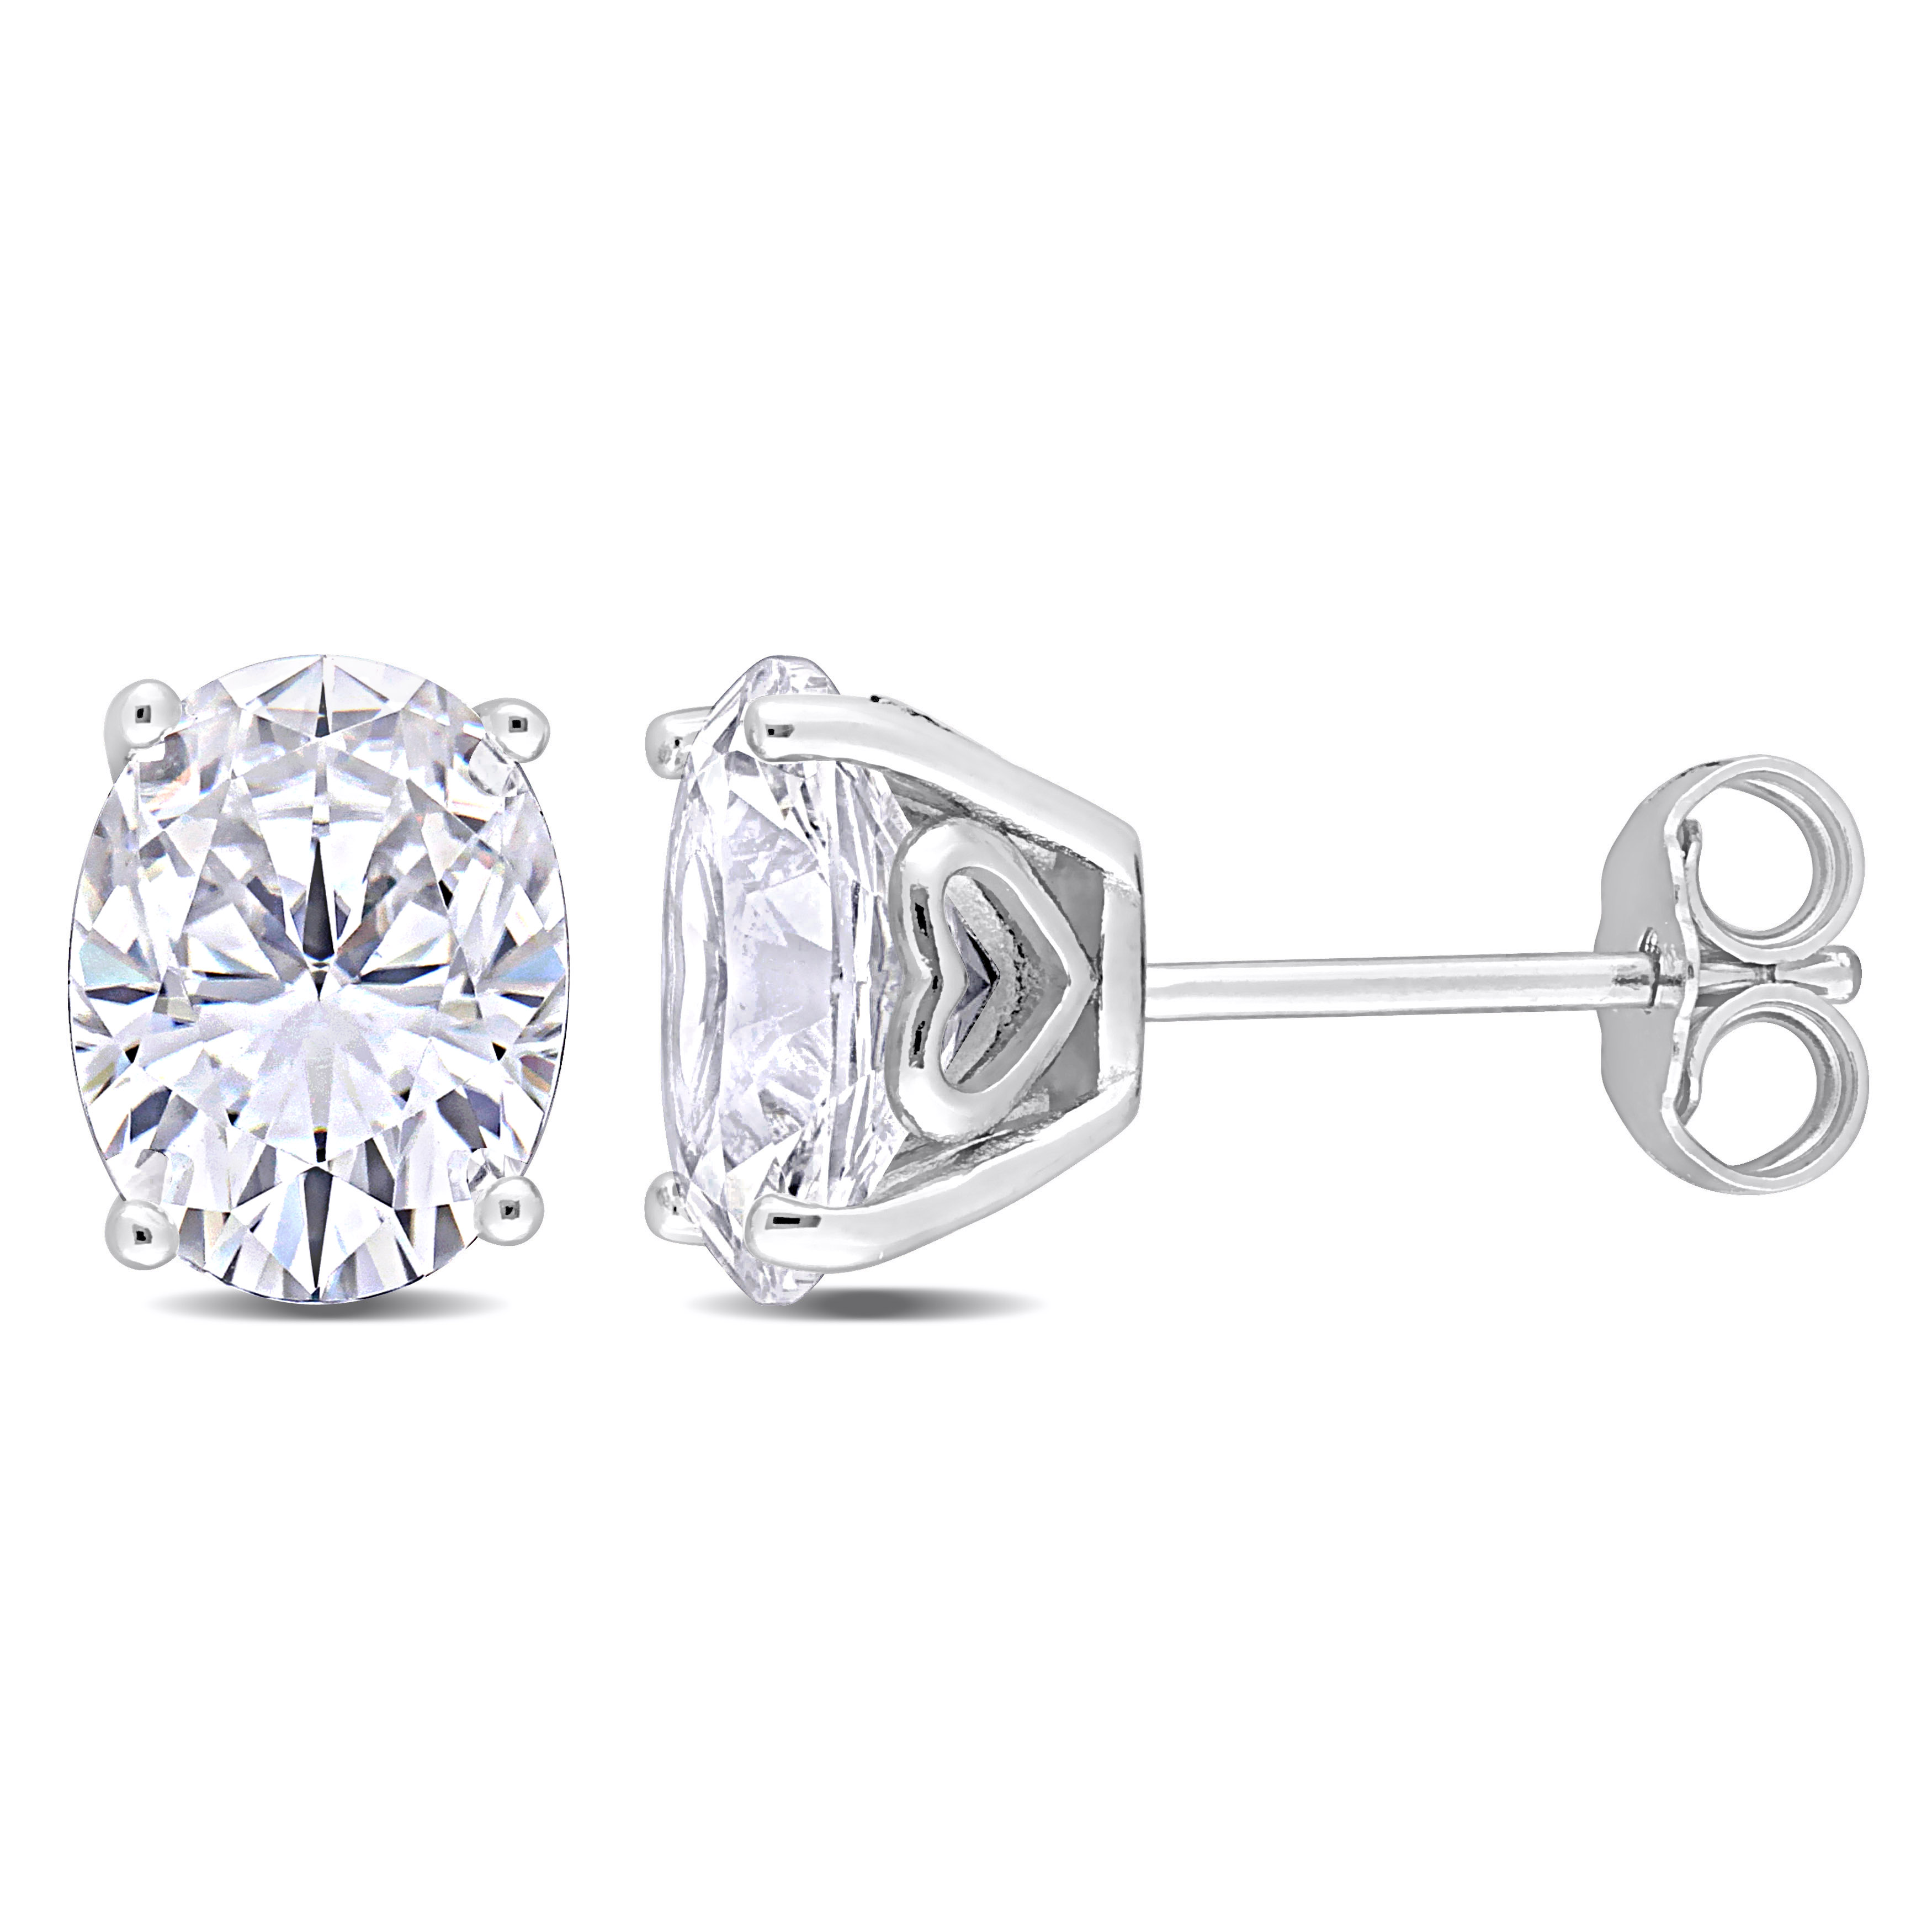 5 7/8 CT TGW Oval Created White Sapphire Stud Earrings in Sterling Silver